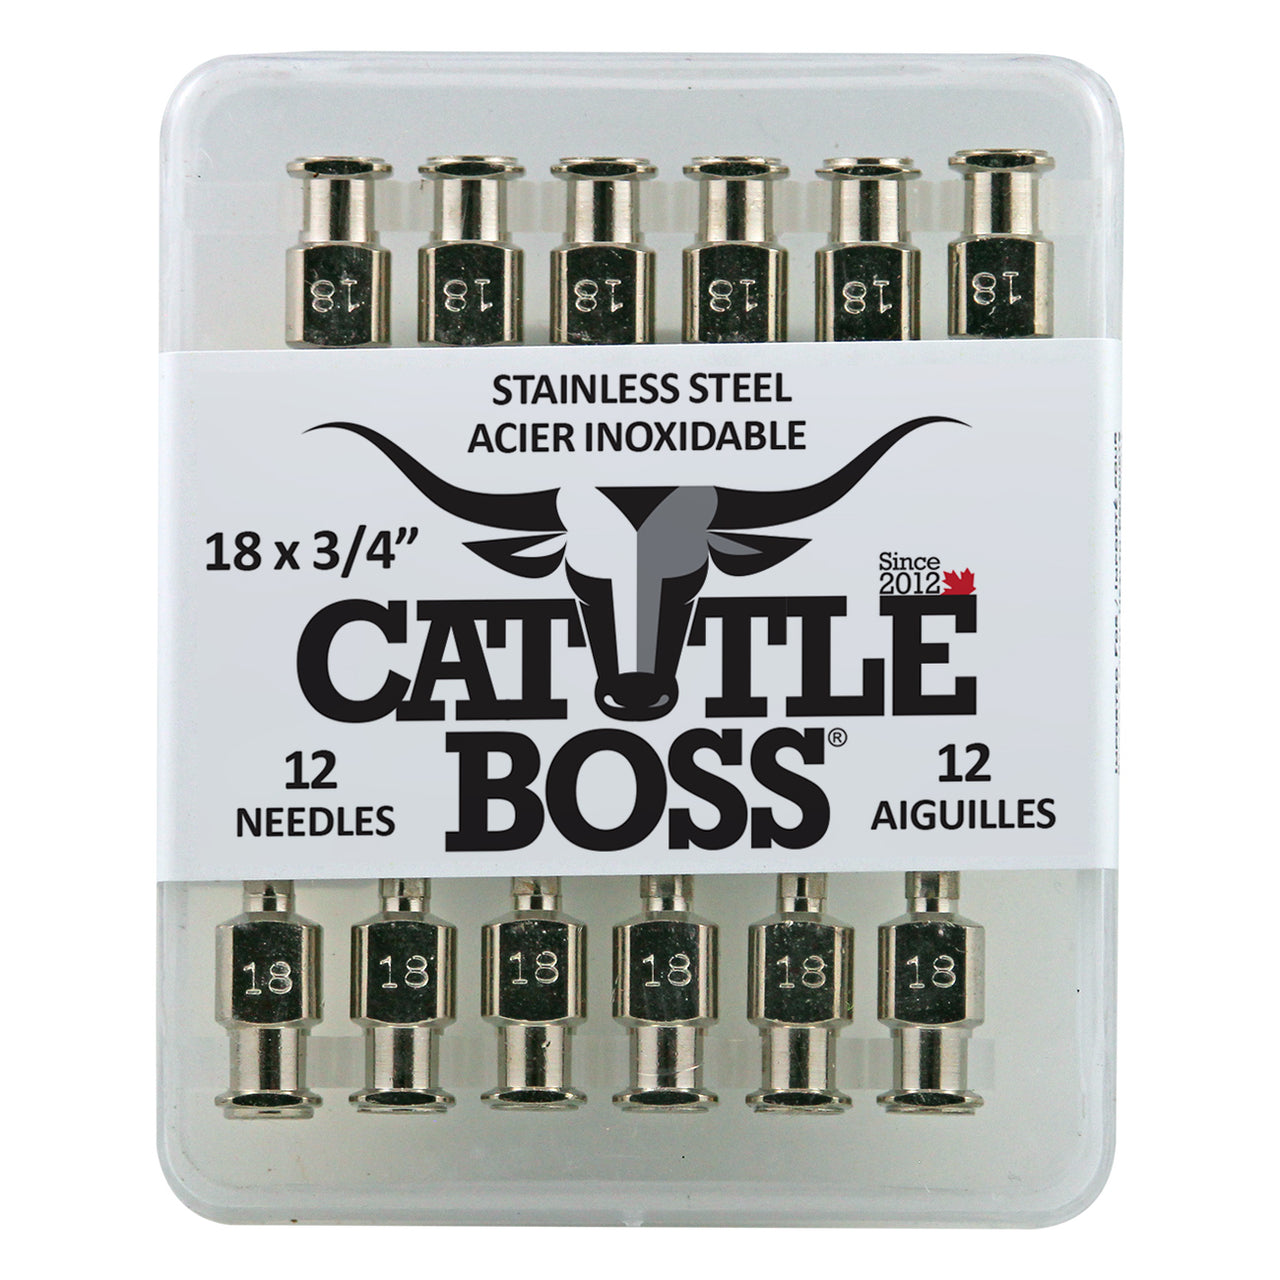 Cattle Boss Stainless Steel Hub Needle (12 Pack) 18X3/4 - Drug Administration Cattle Boss - Canada